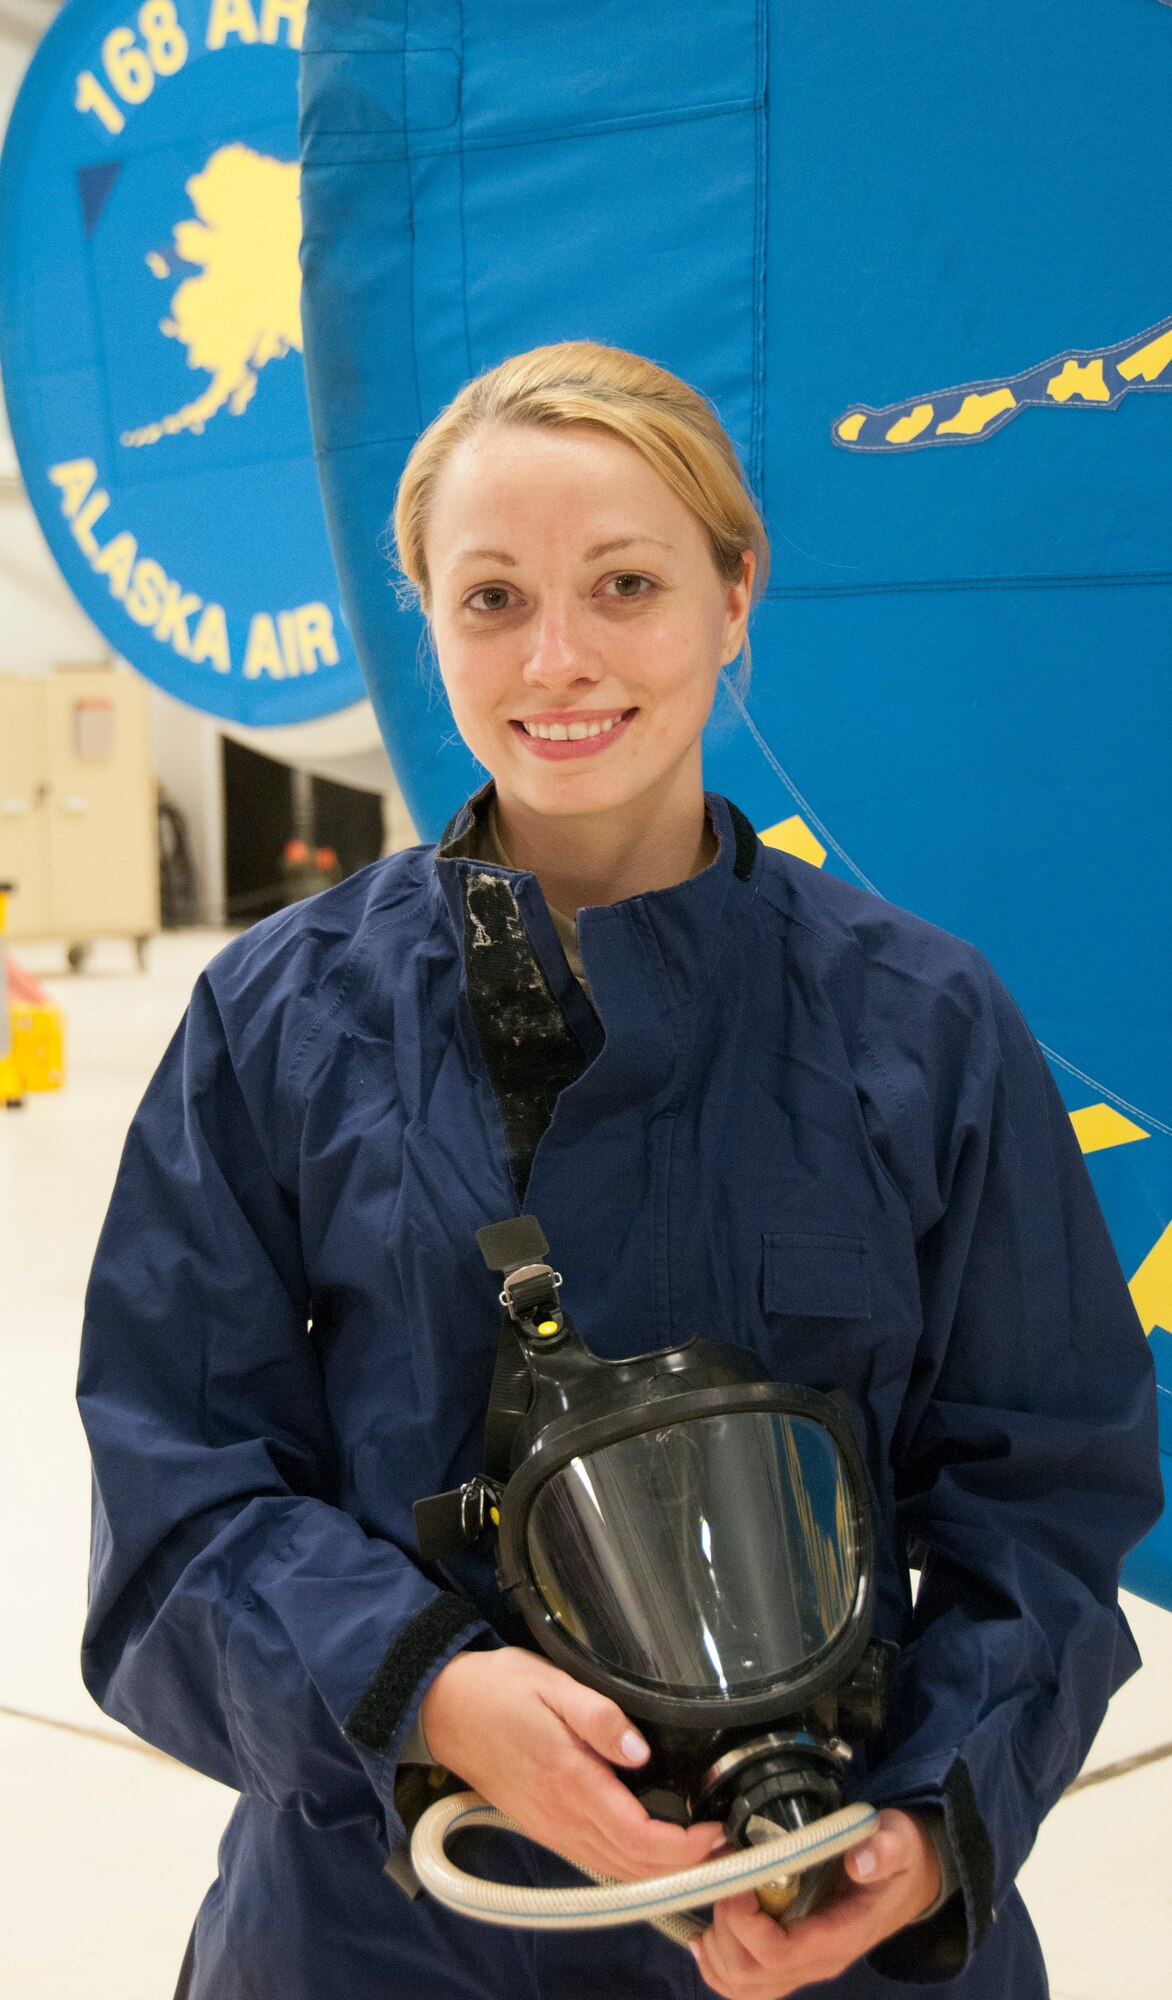 Staff Sgt. Julia Meyer, a fuels systems mechanic with the 168th Maintenance Squadron, holds her respirator while dressed in waterproof overalls inside the unit's fuel cell at Eielson AFB, Alaska, October 18, 2016. Meyer is a fulltime technician with the Interior-Alaska unit and was recognized for her outstanding technical abilities during a recent deployment to Southwest Asia. (U.S. Air National Guard photo by Senior Master Sgt. Paul Mann/Released)